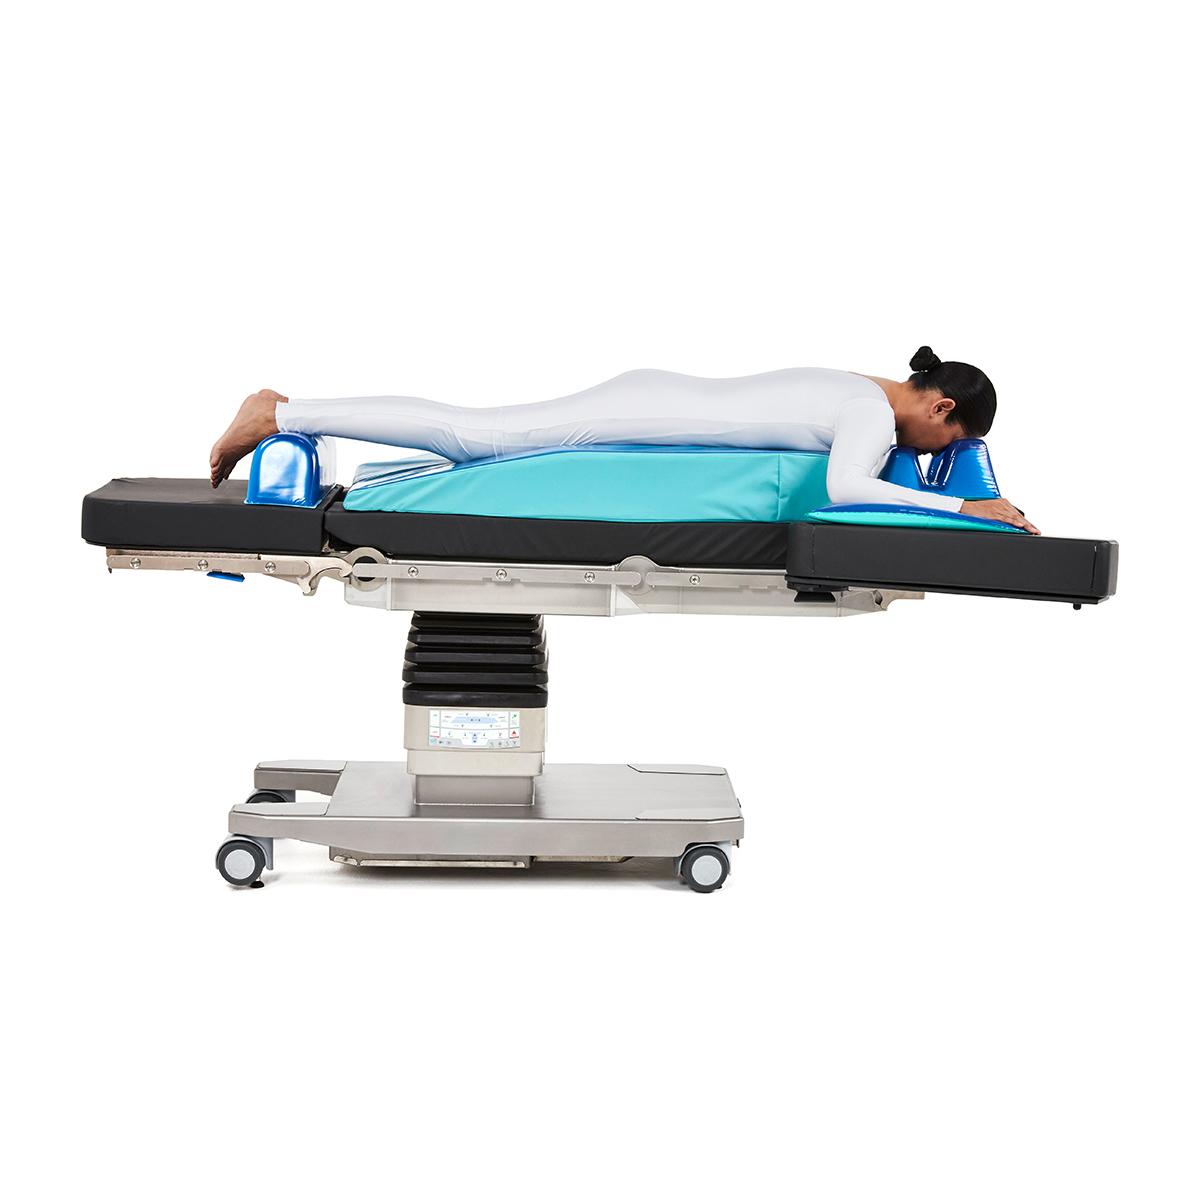 Patient positioned on Hillrom surgical table equipped with Gel Positioners accessories. 